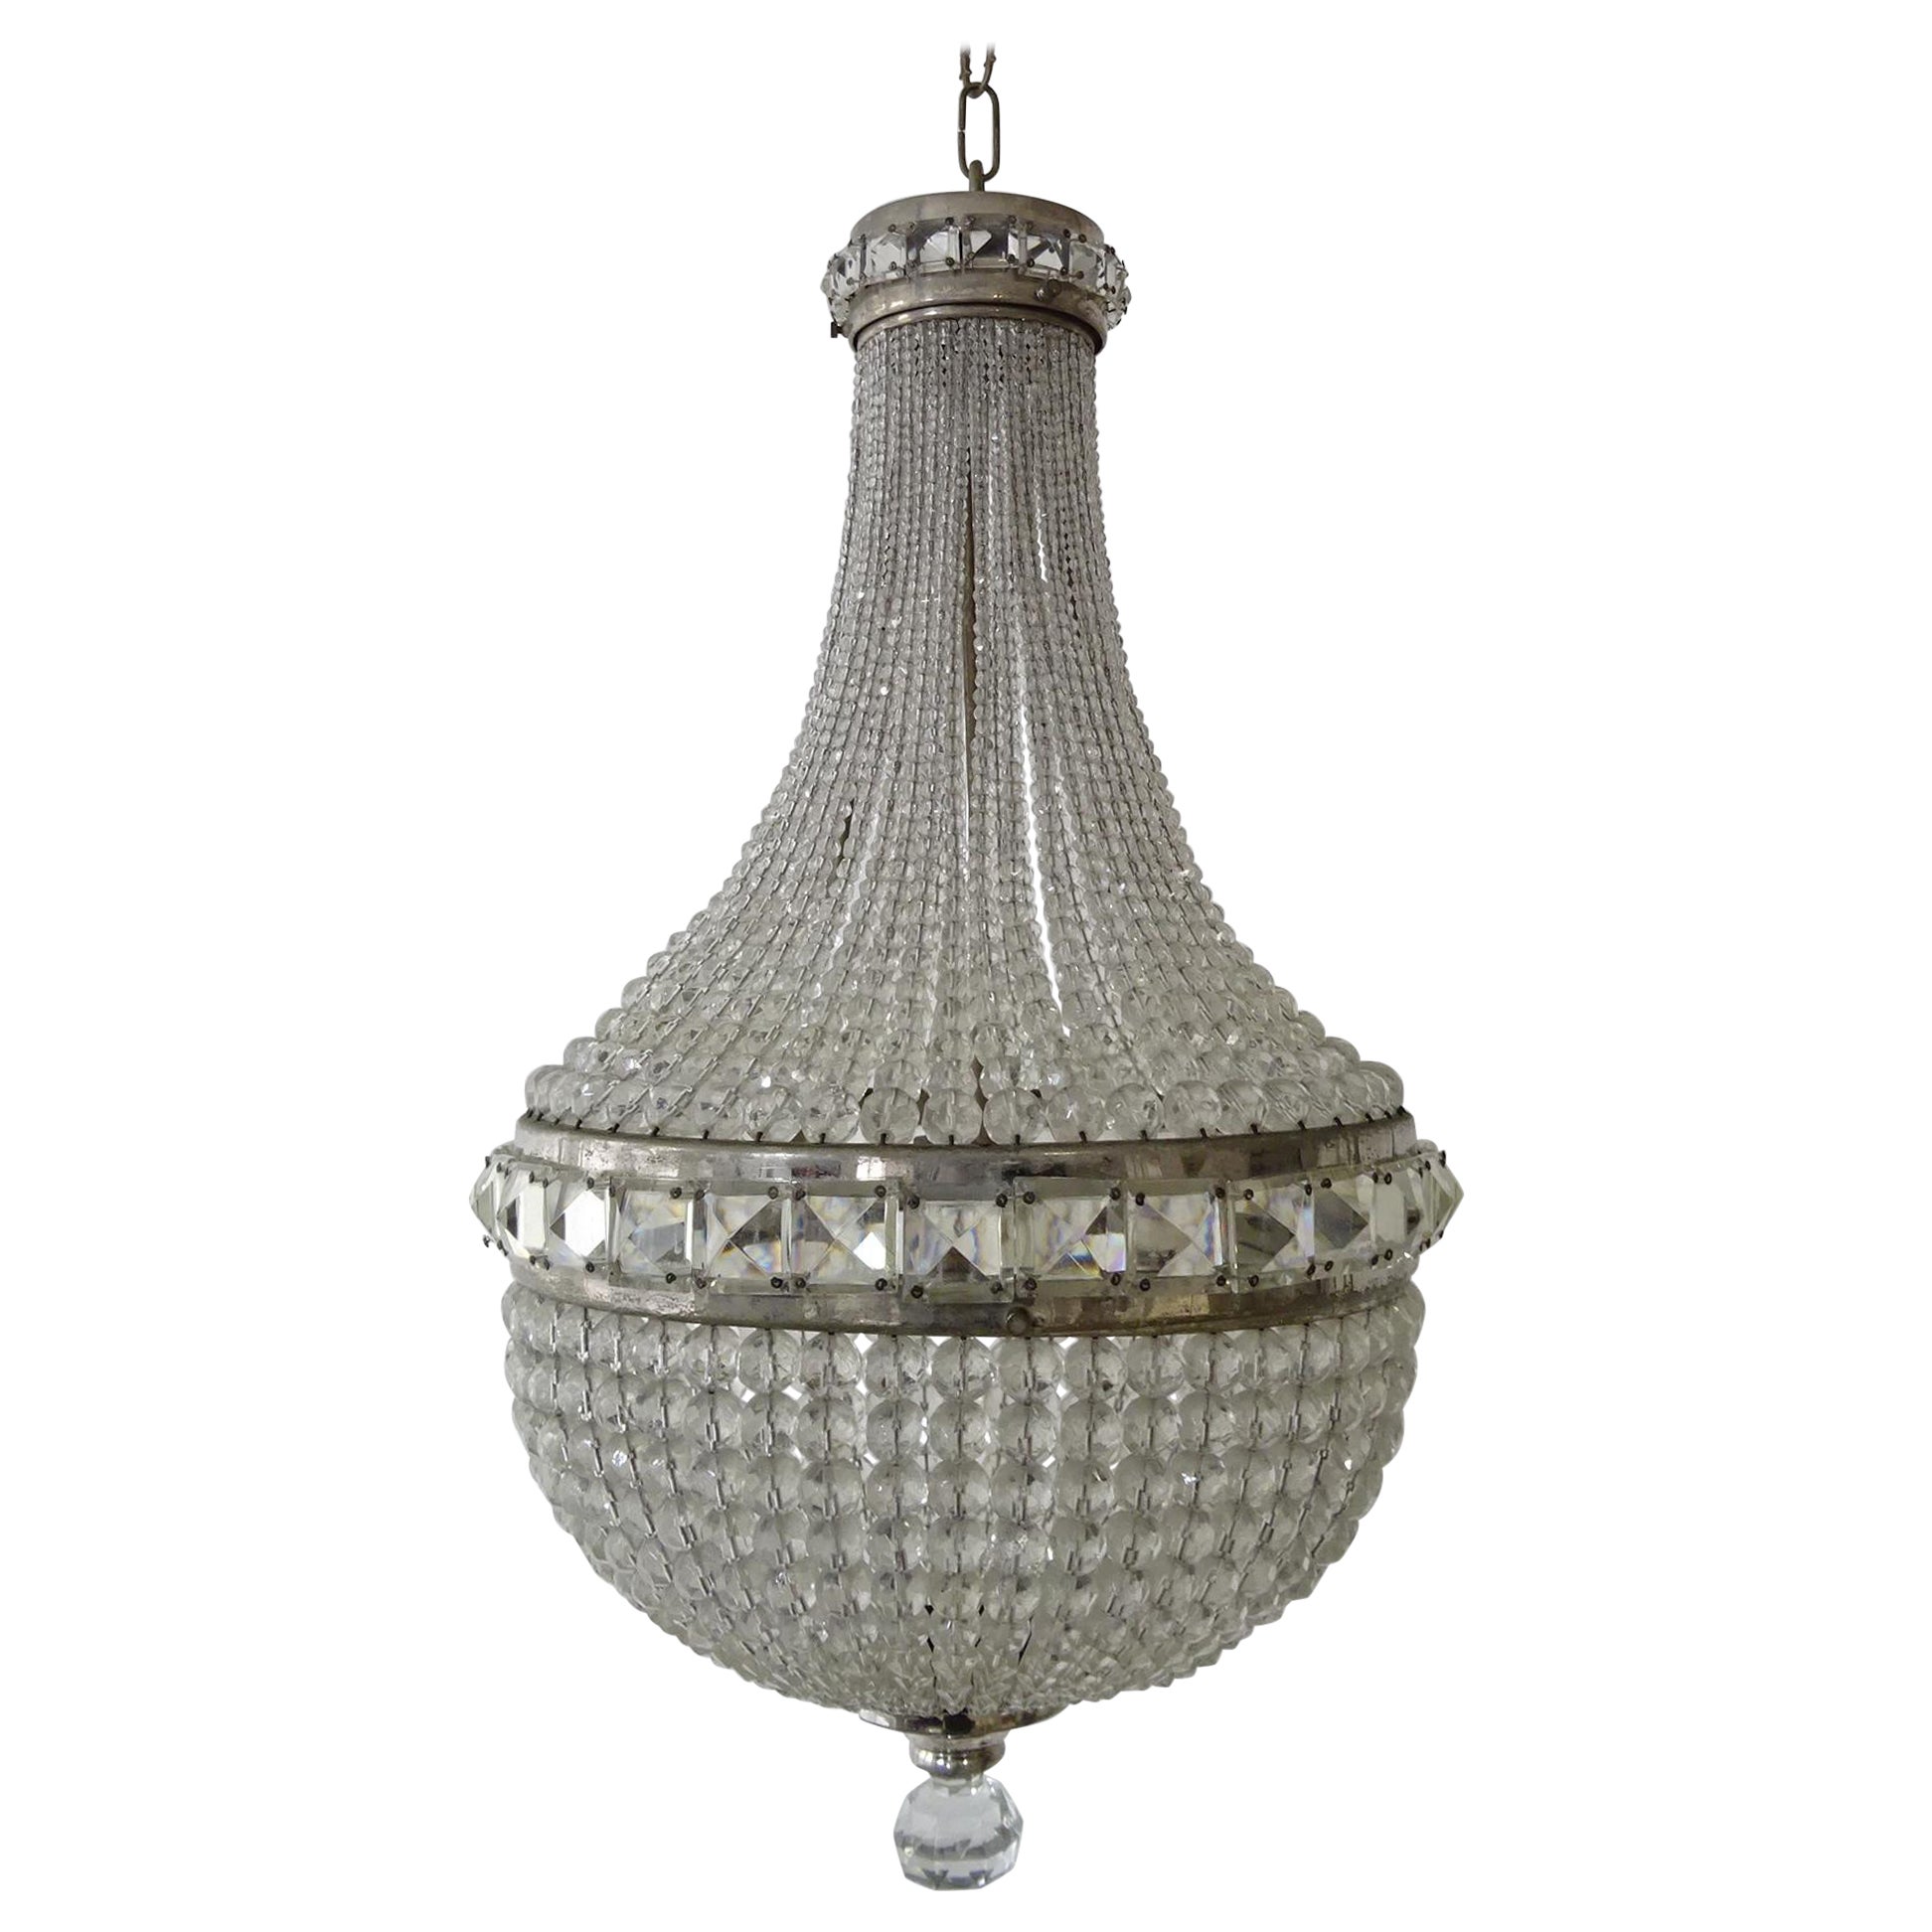 Big Crystal Beaded Empire Dome Chandelier circa 1900 For Sale